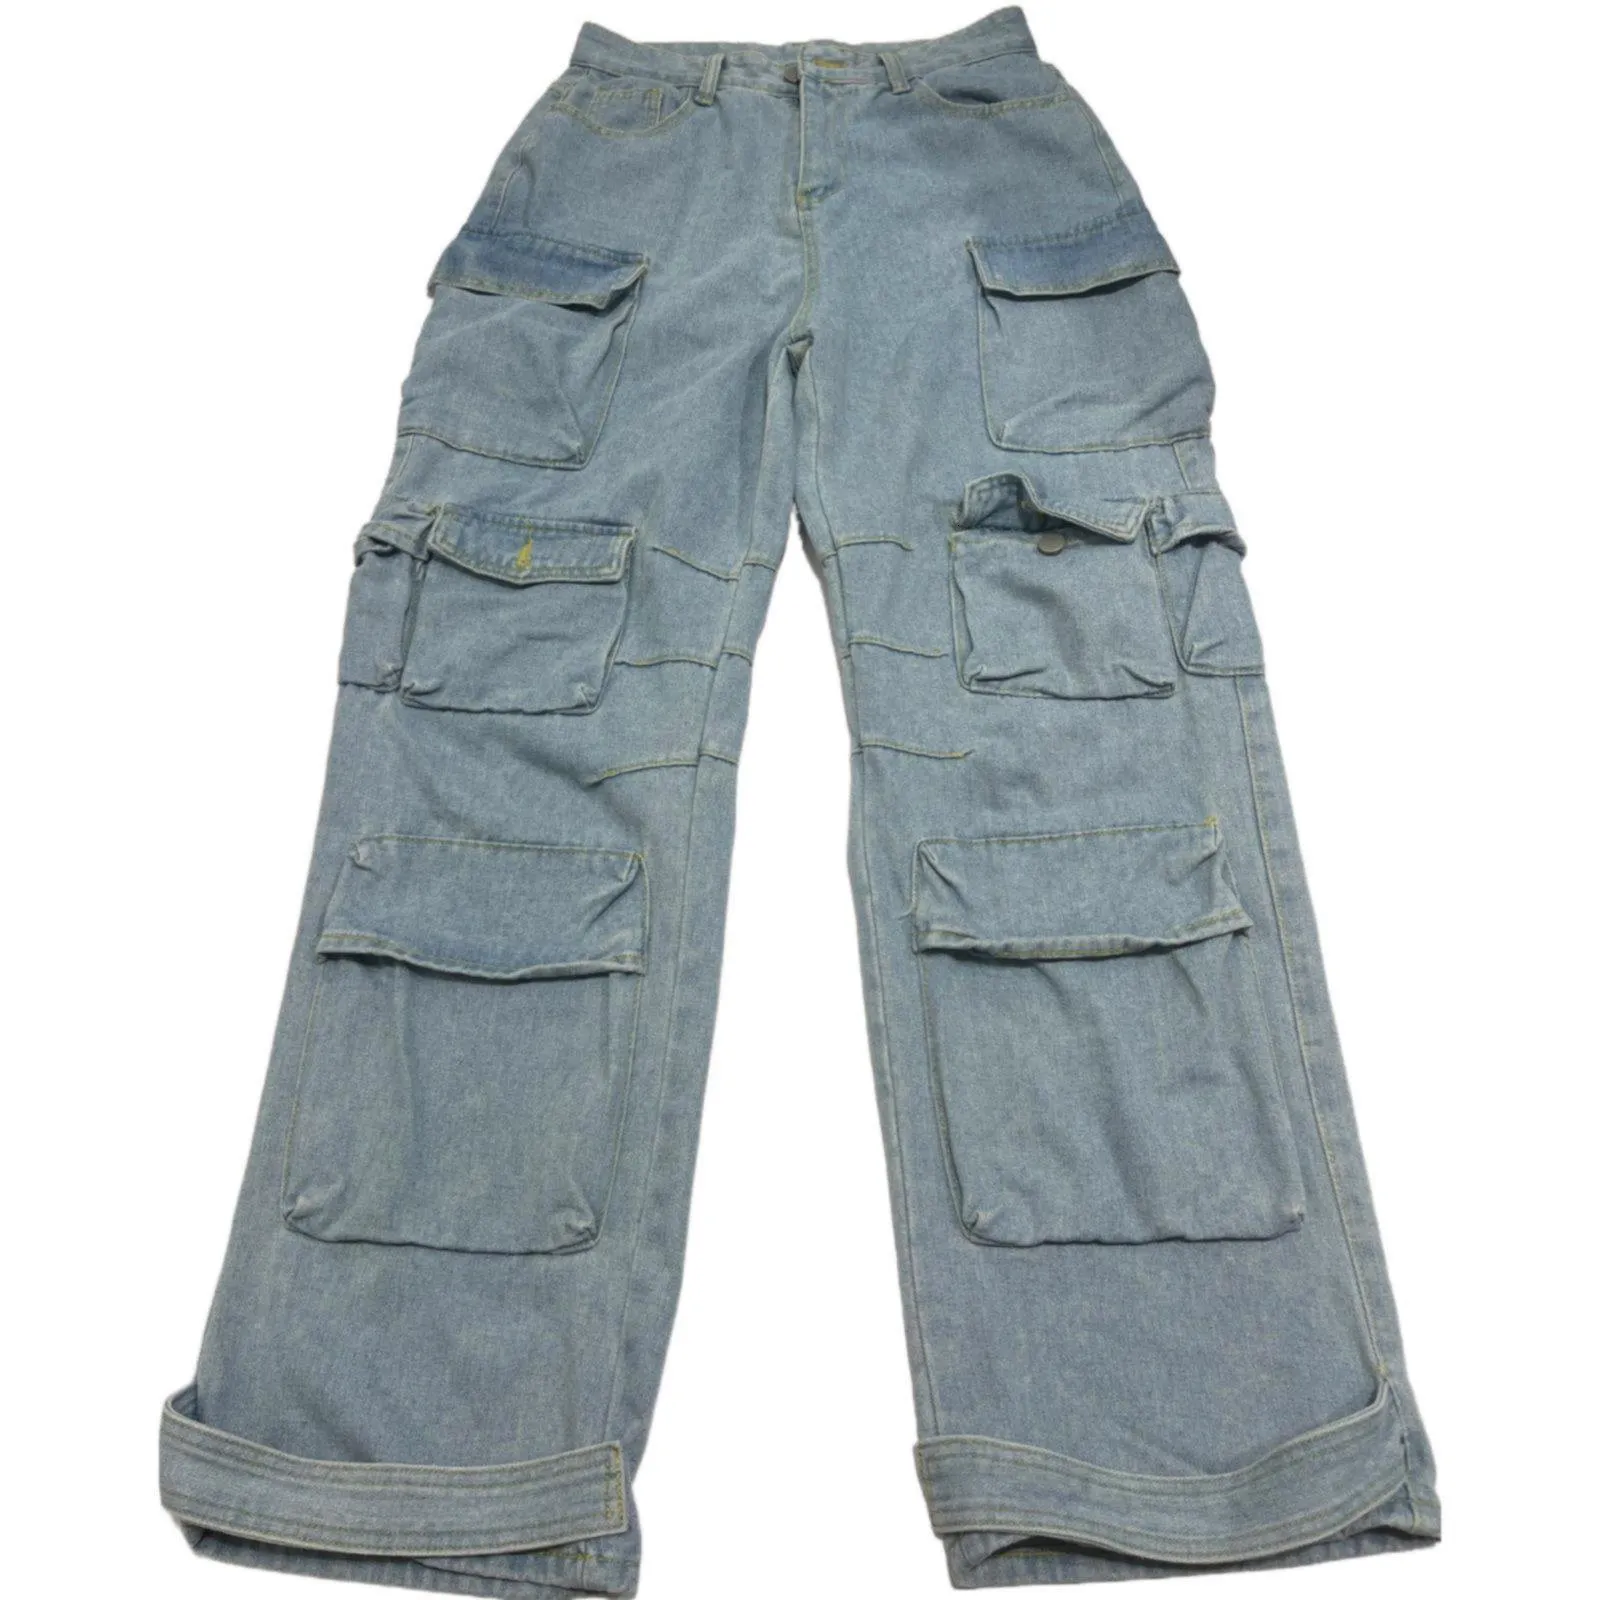 Womens Oversized Denim Cargo Pants With Multi Pockets Relaxed Streetwear  Ladies Cargo Trousers Primark For Women Style #230823 From B121144507,  $27.55